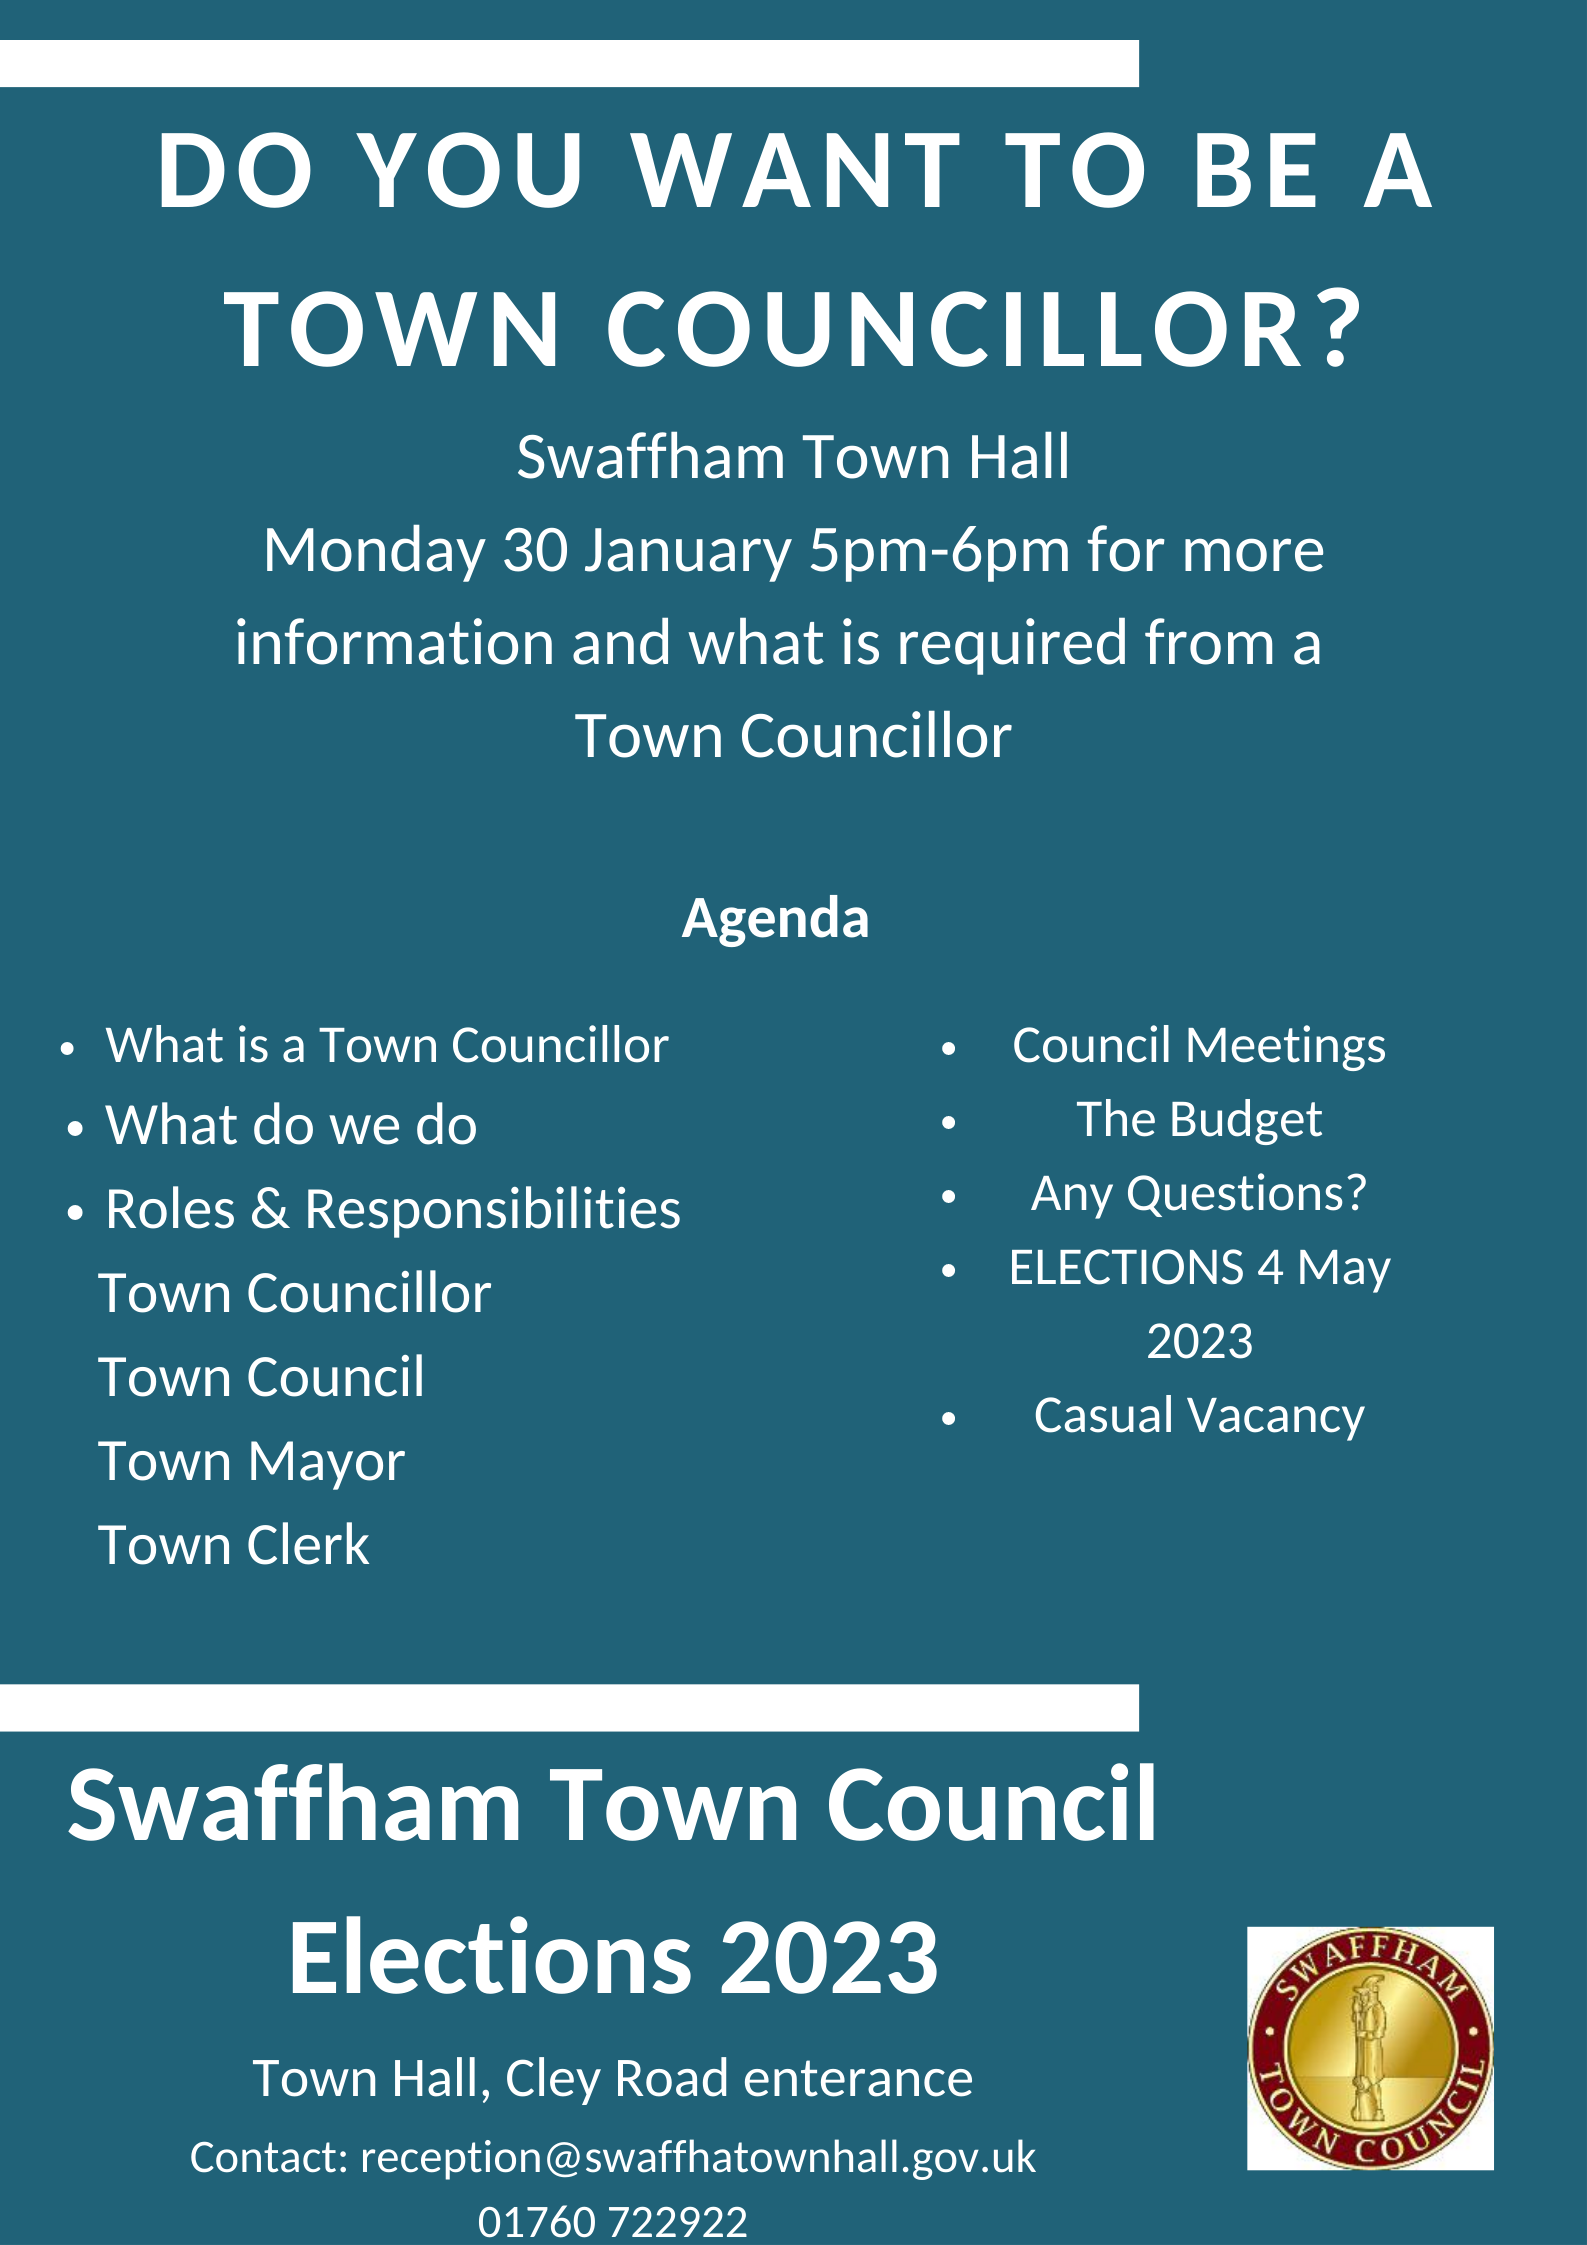 Swaffham Town Council Elections 2023